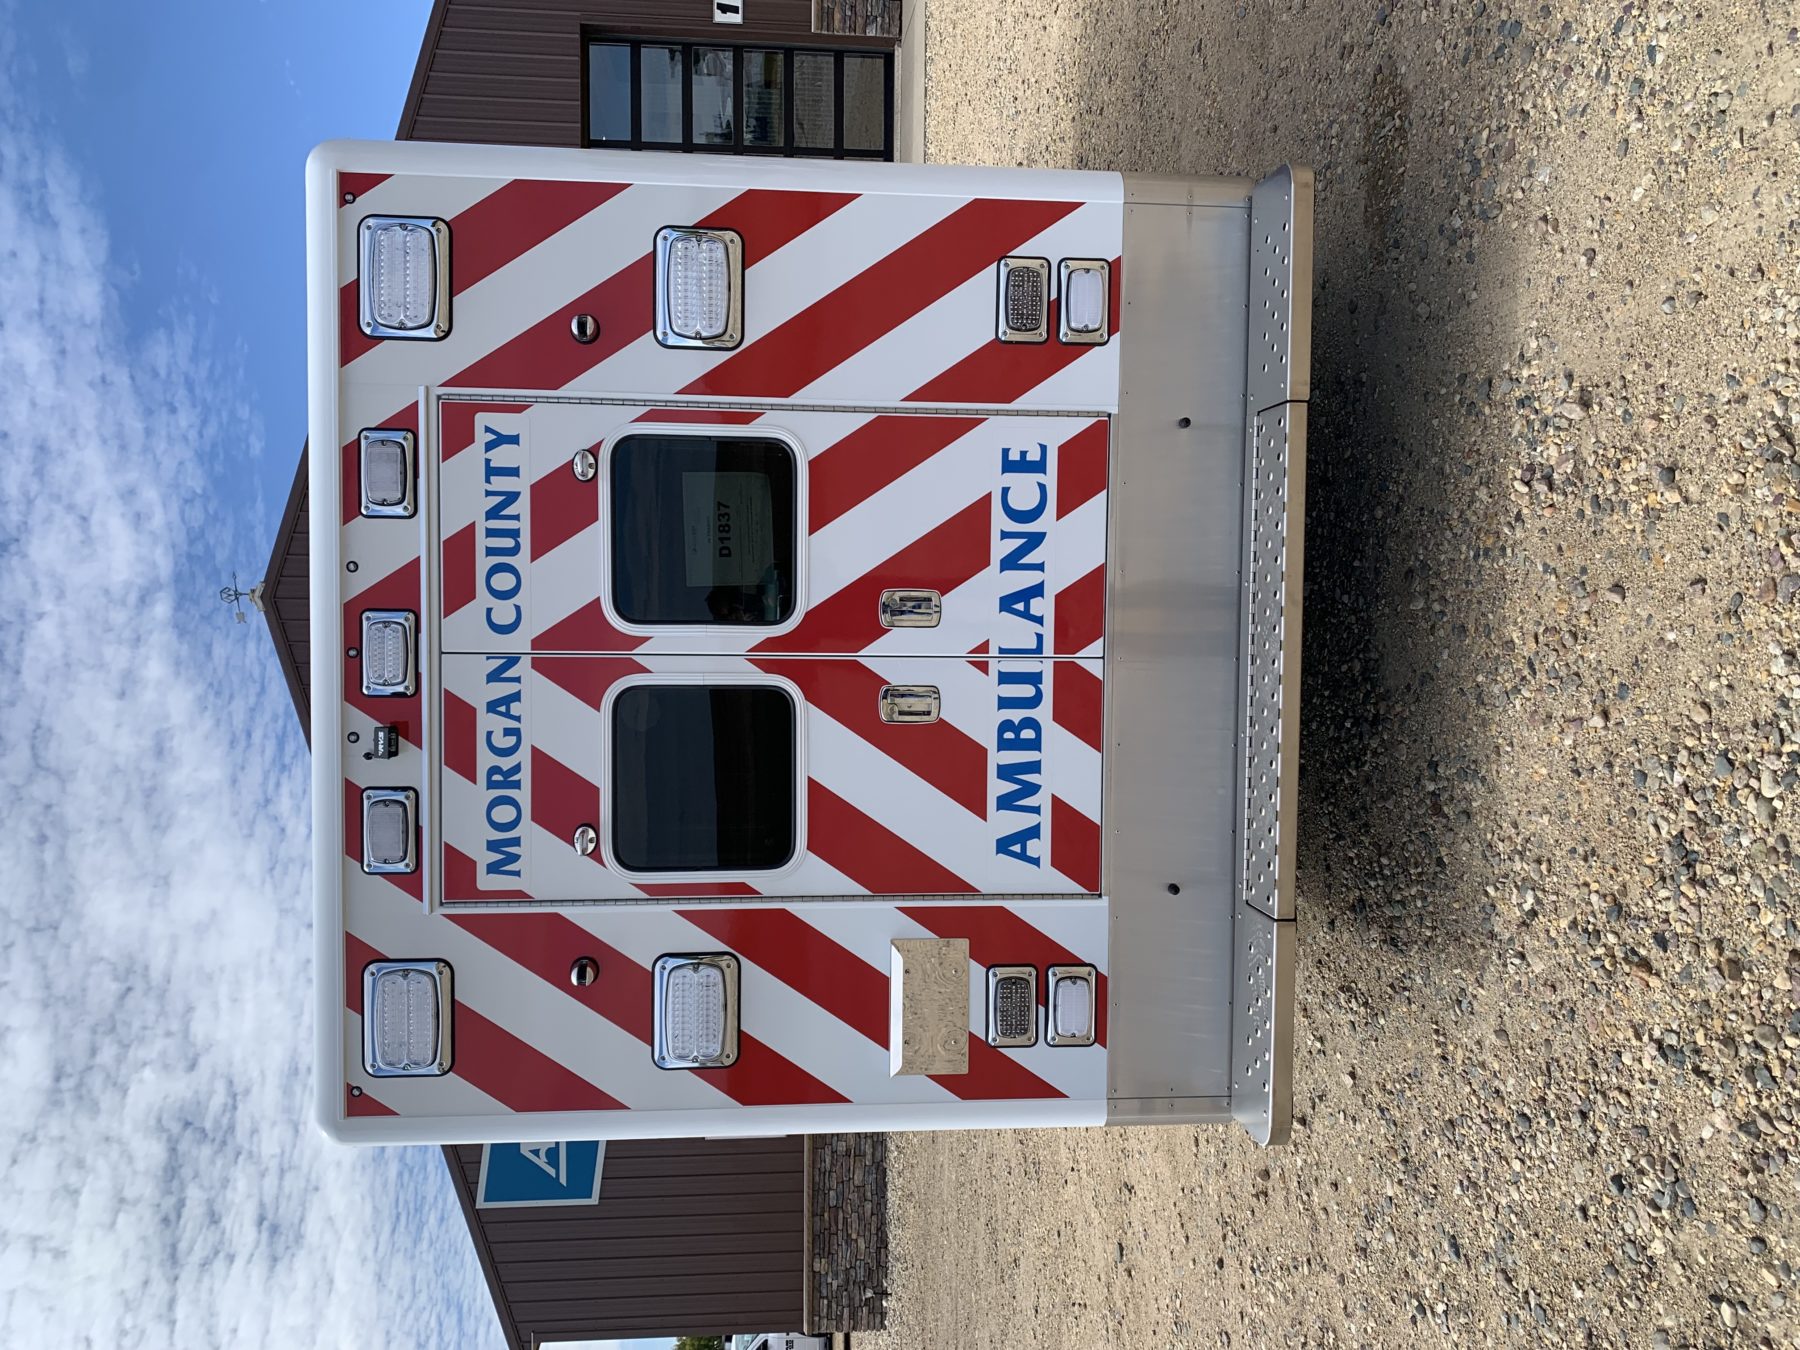 2021 Ram 4500 4x4 Heavy Duty Ambulance For Sale – Picture 7